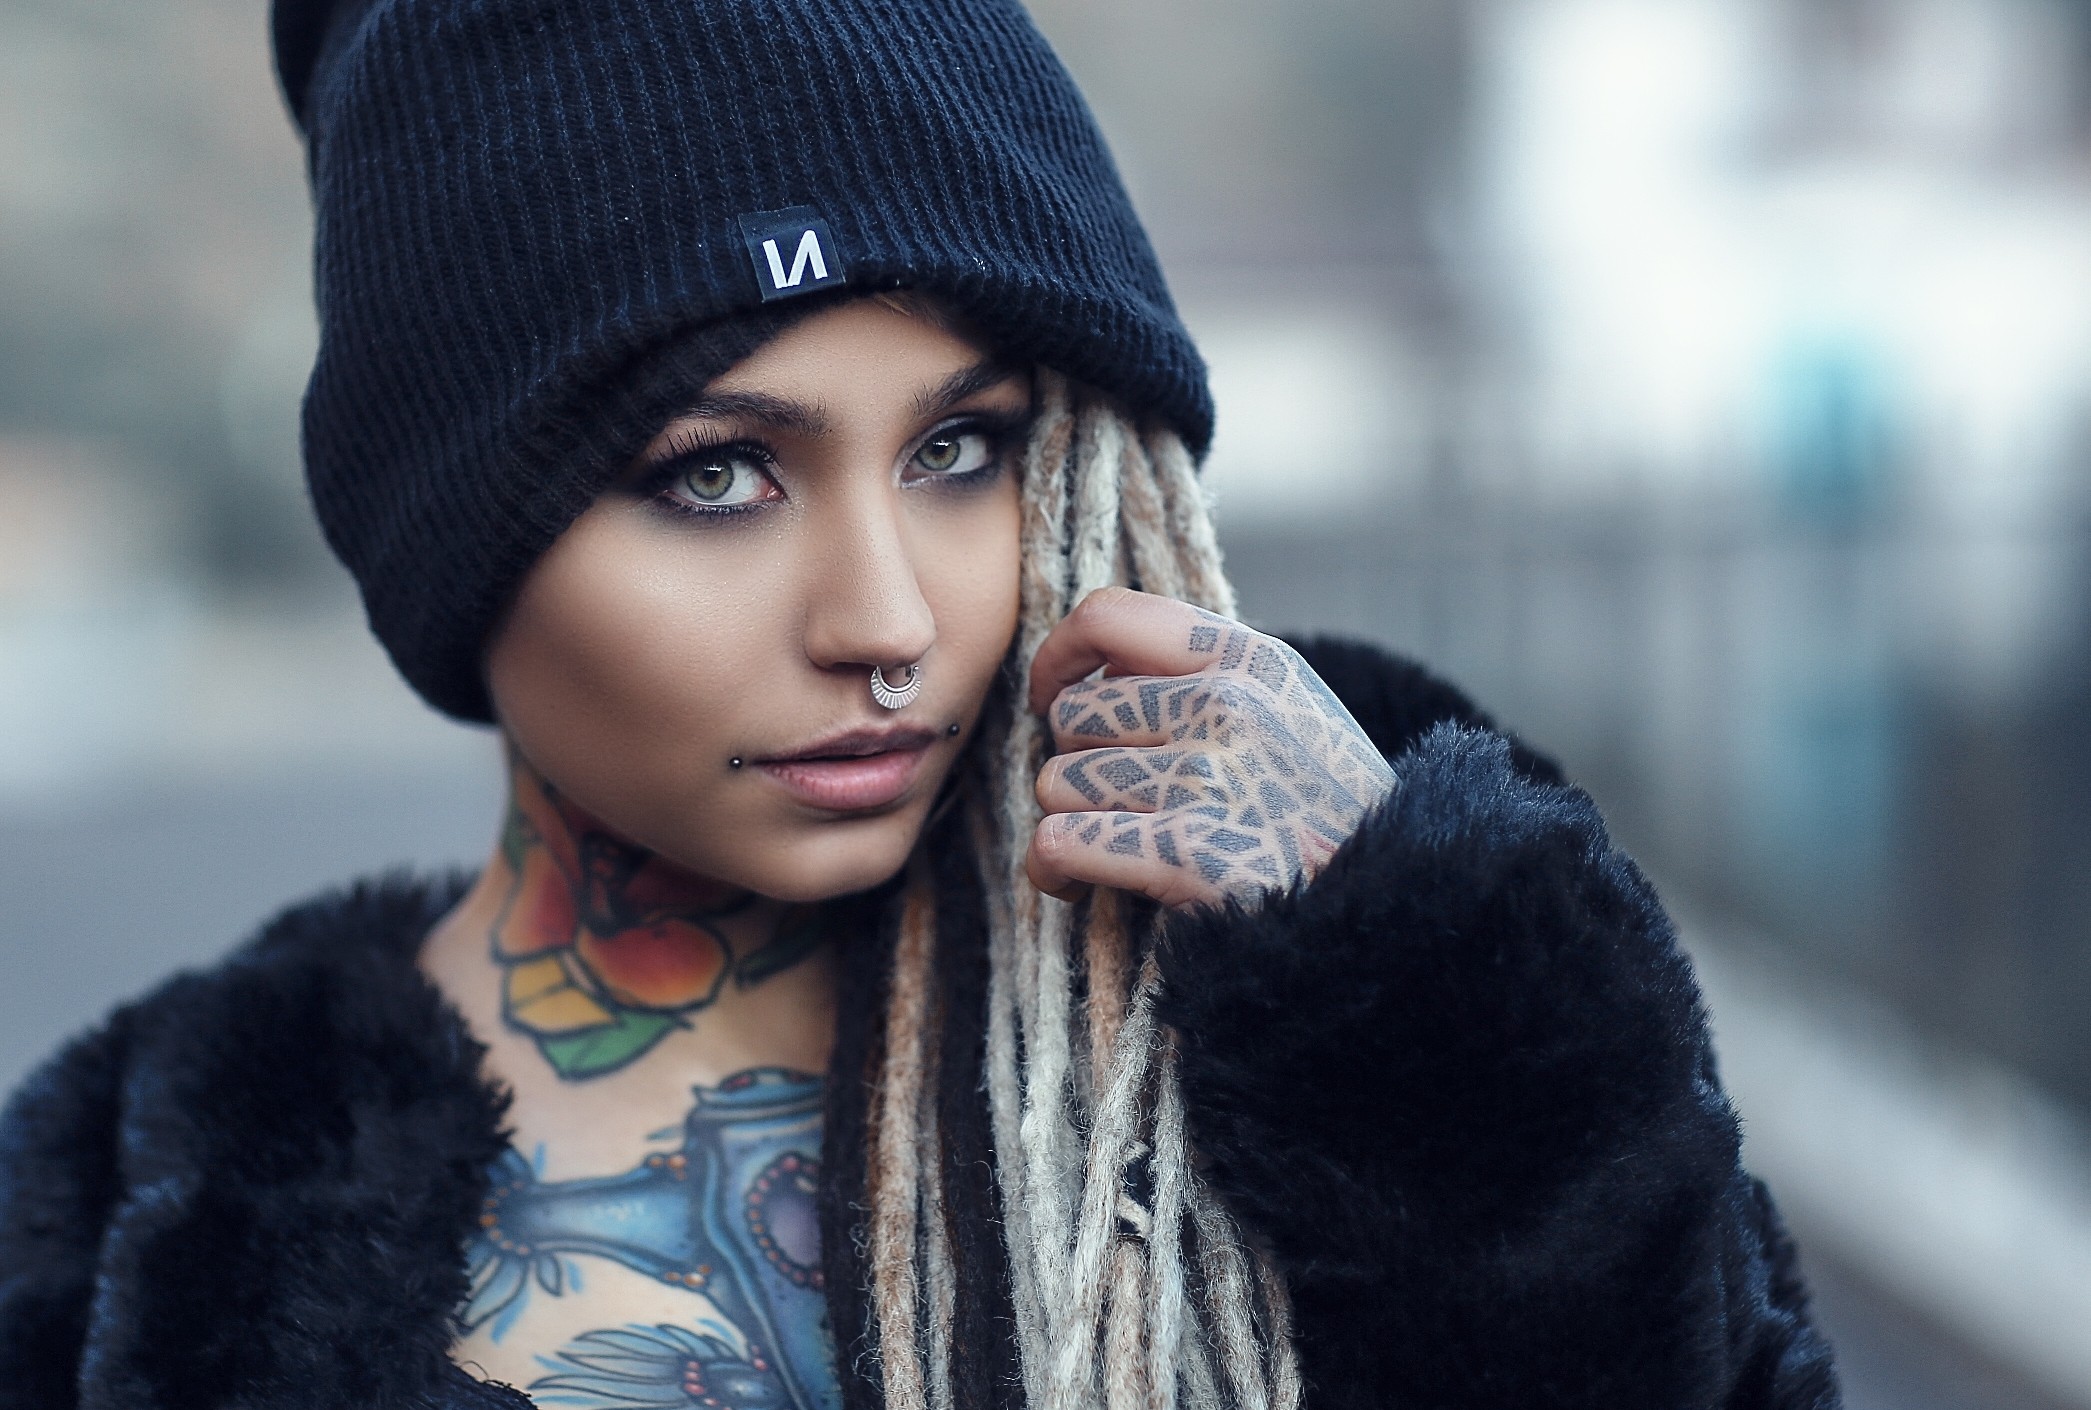 People 2091x1410 hat women tattoo face portrait looking at viewer Fishball Suicide Suicide Girls wool cap women with hats nose ring inked girls makeup closeup women outdoors urban piercing model dreadlocks